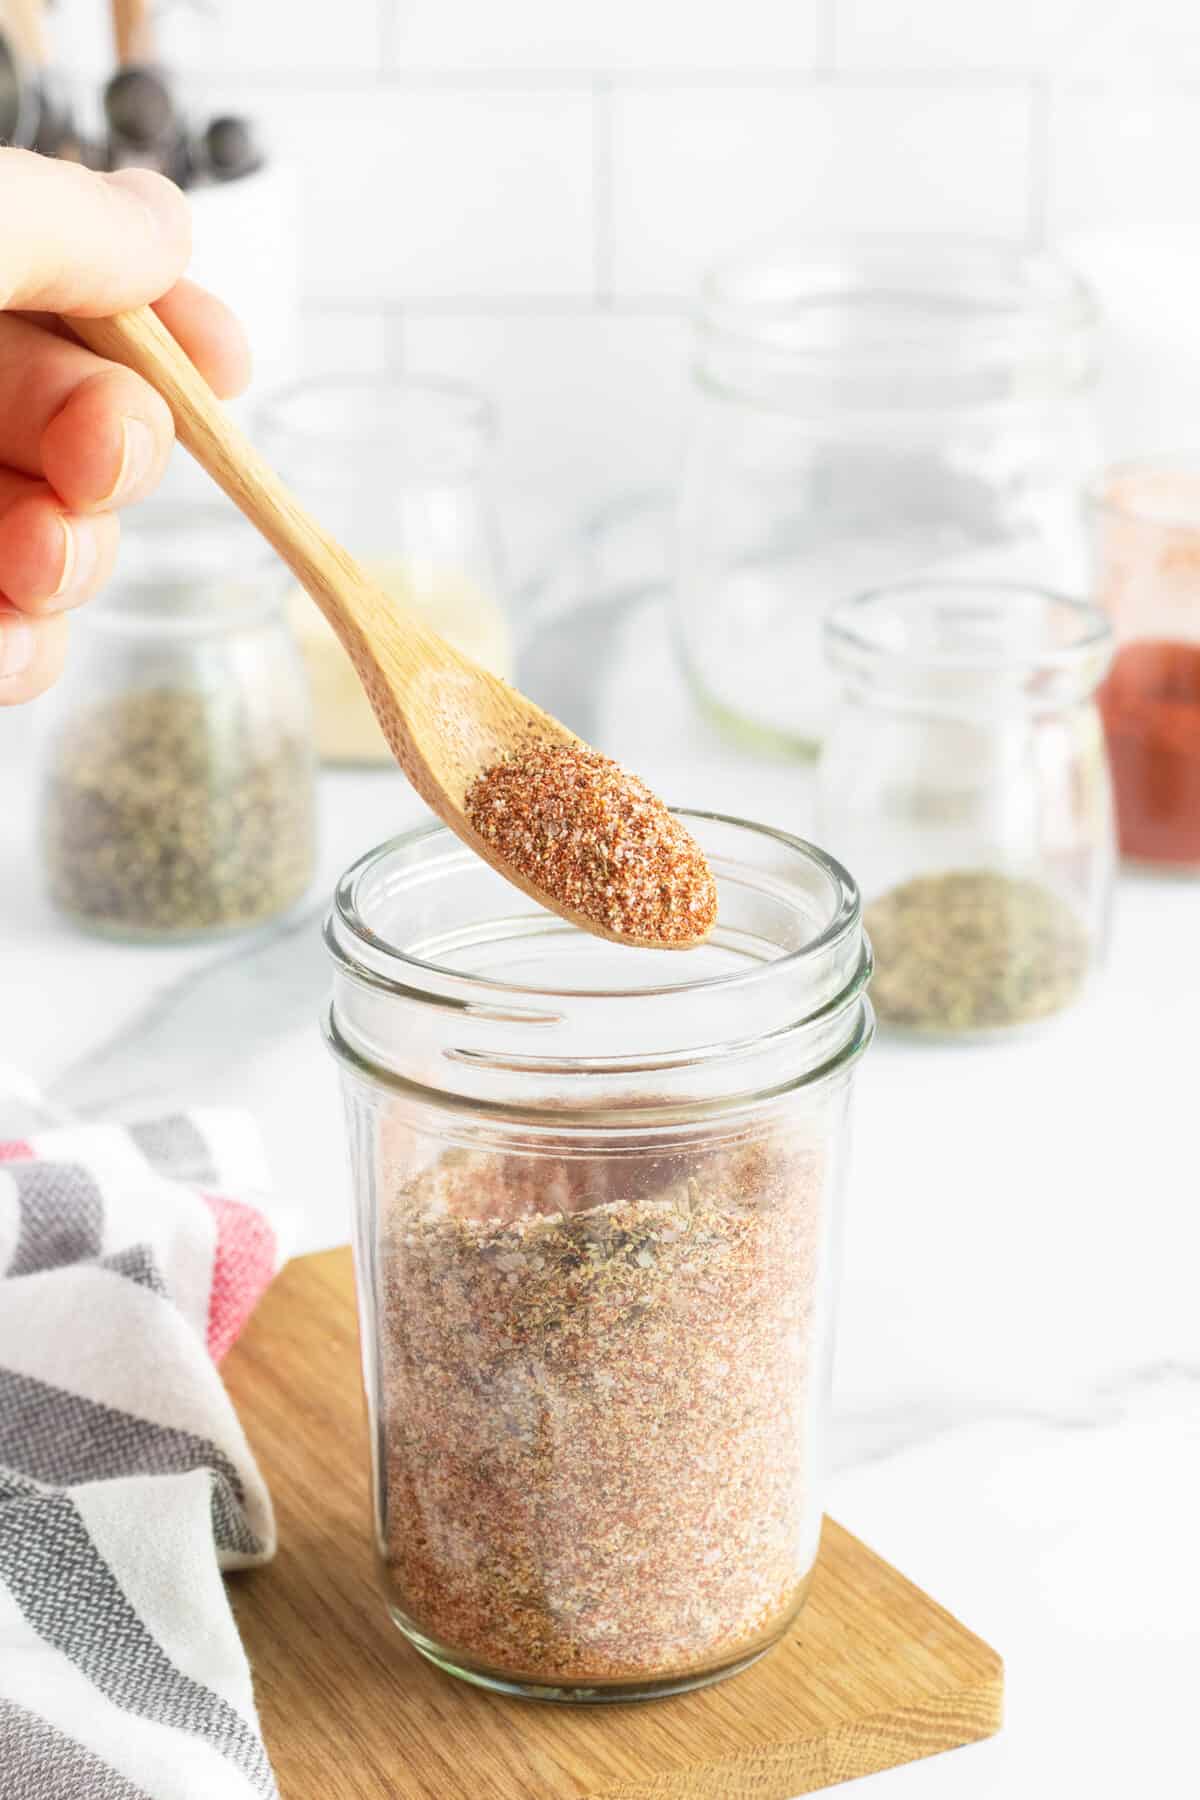 Chicken wing rub in a jar with a spoon